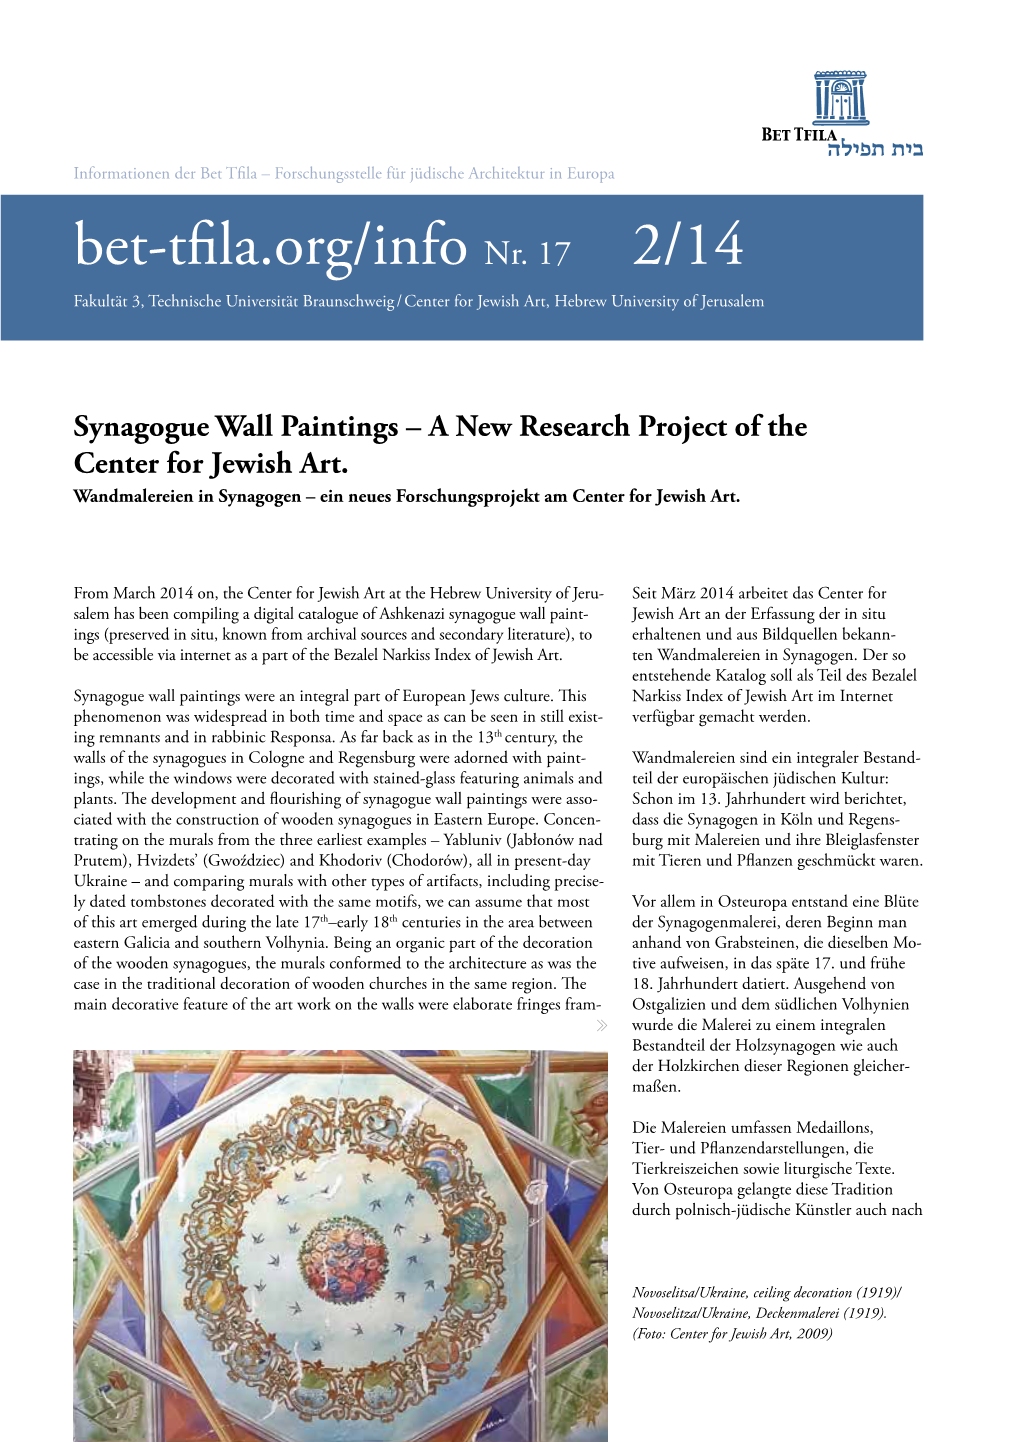 Synagogue Wall Paintings – a New Research Project of the Center for Jewish Art. Wandmalereien in Synagogen – Ein Neues Forschungsprojekt Am Center for Jewish Art